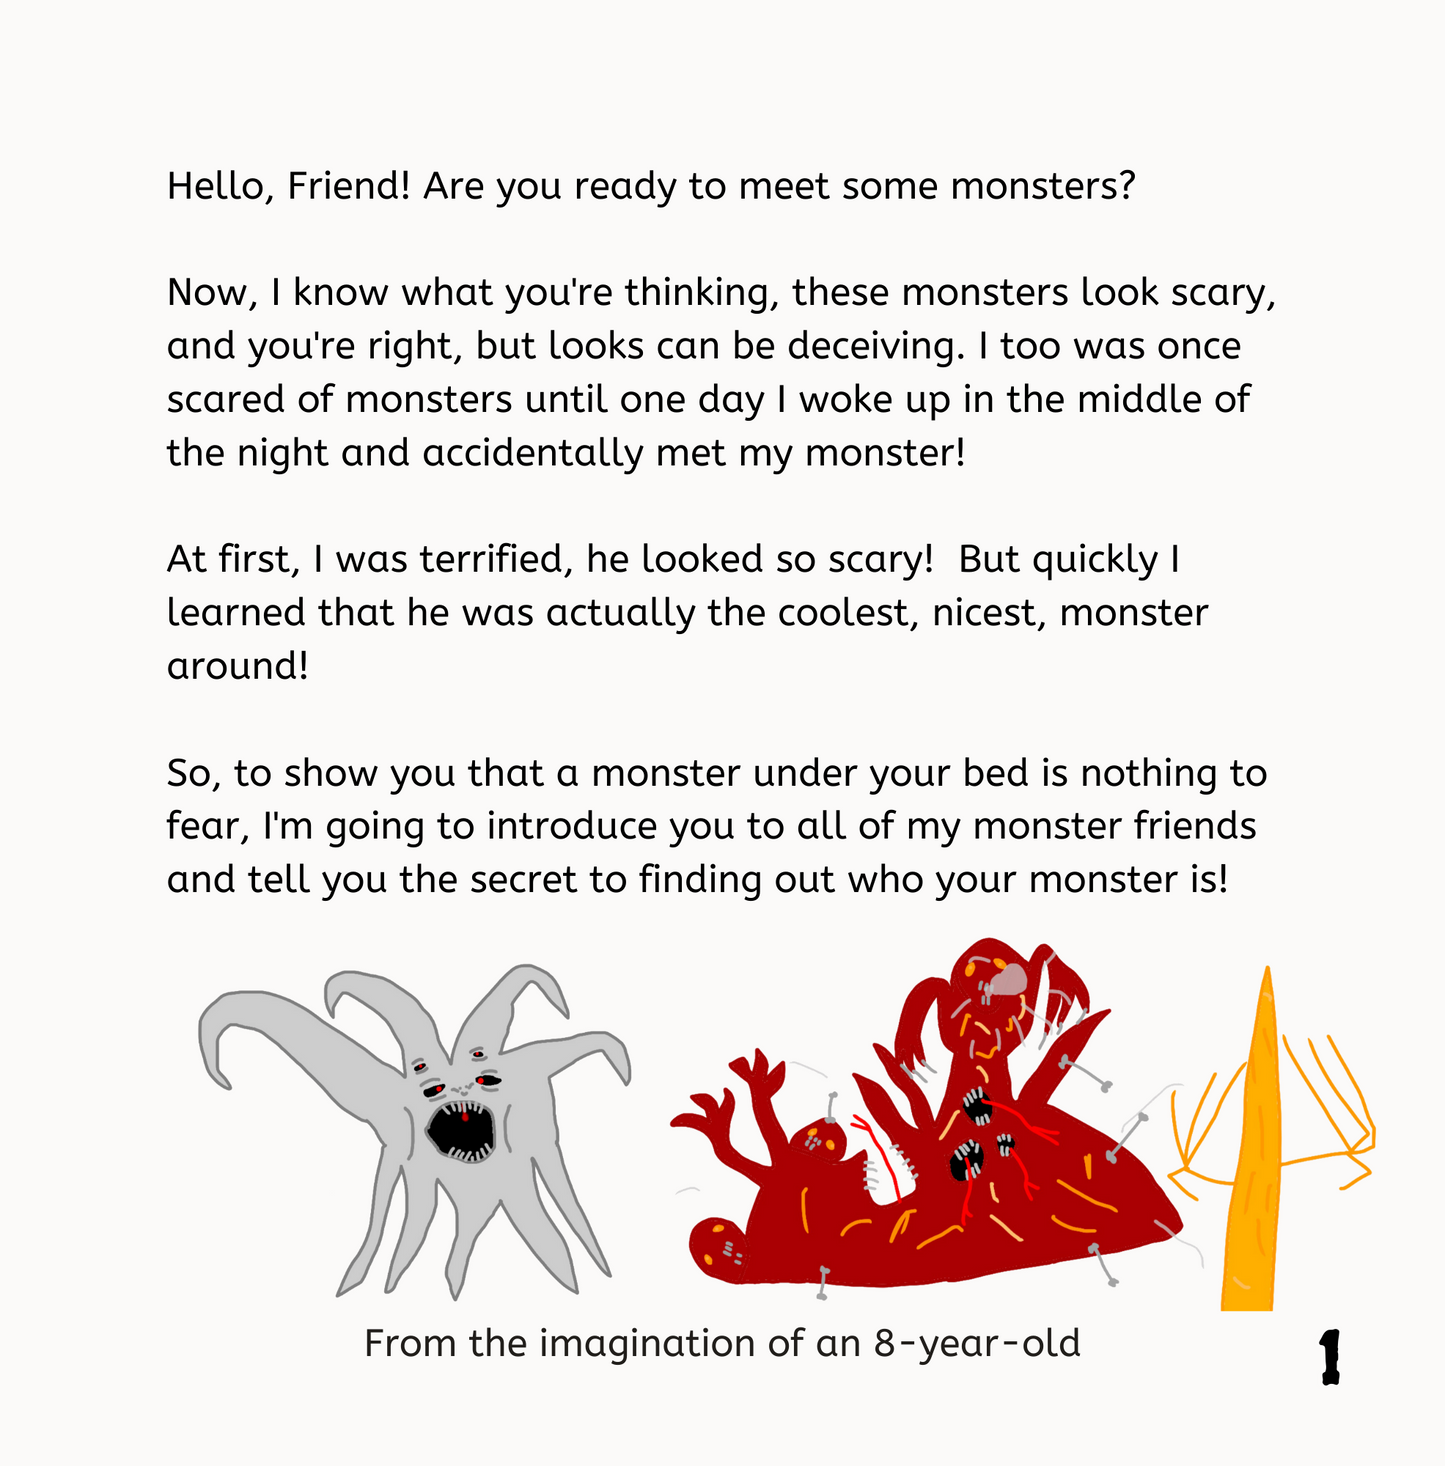 A Guide to Finding your Monster Best Friend